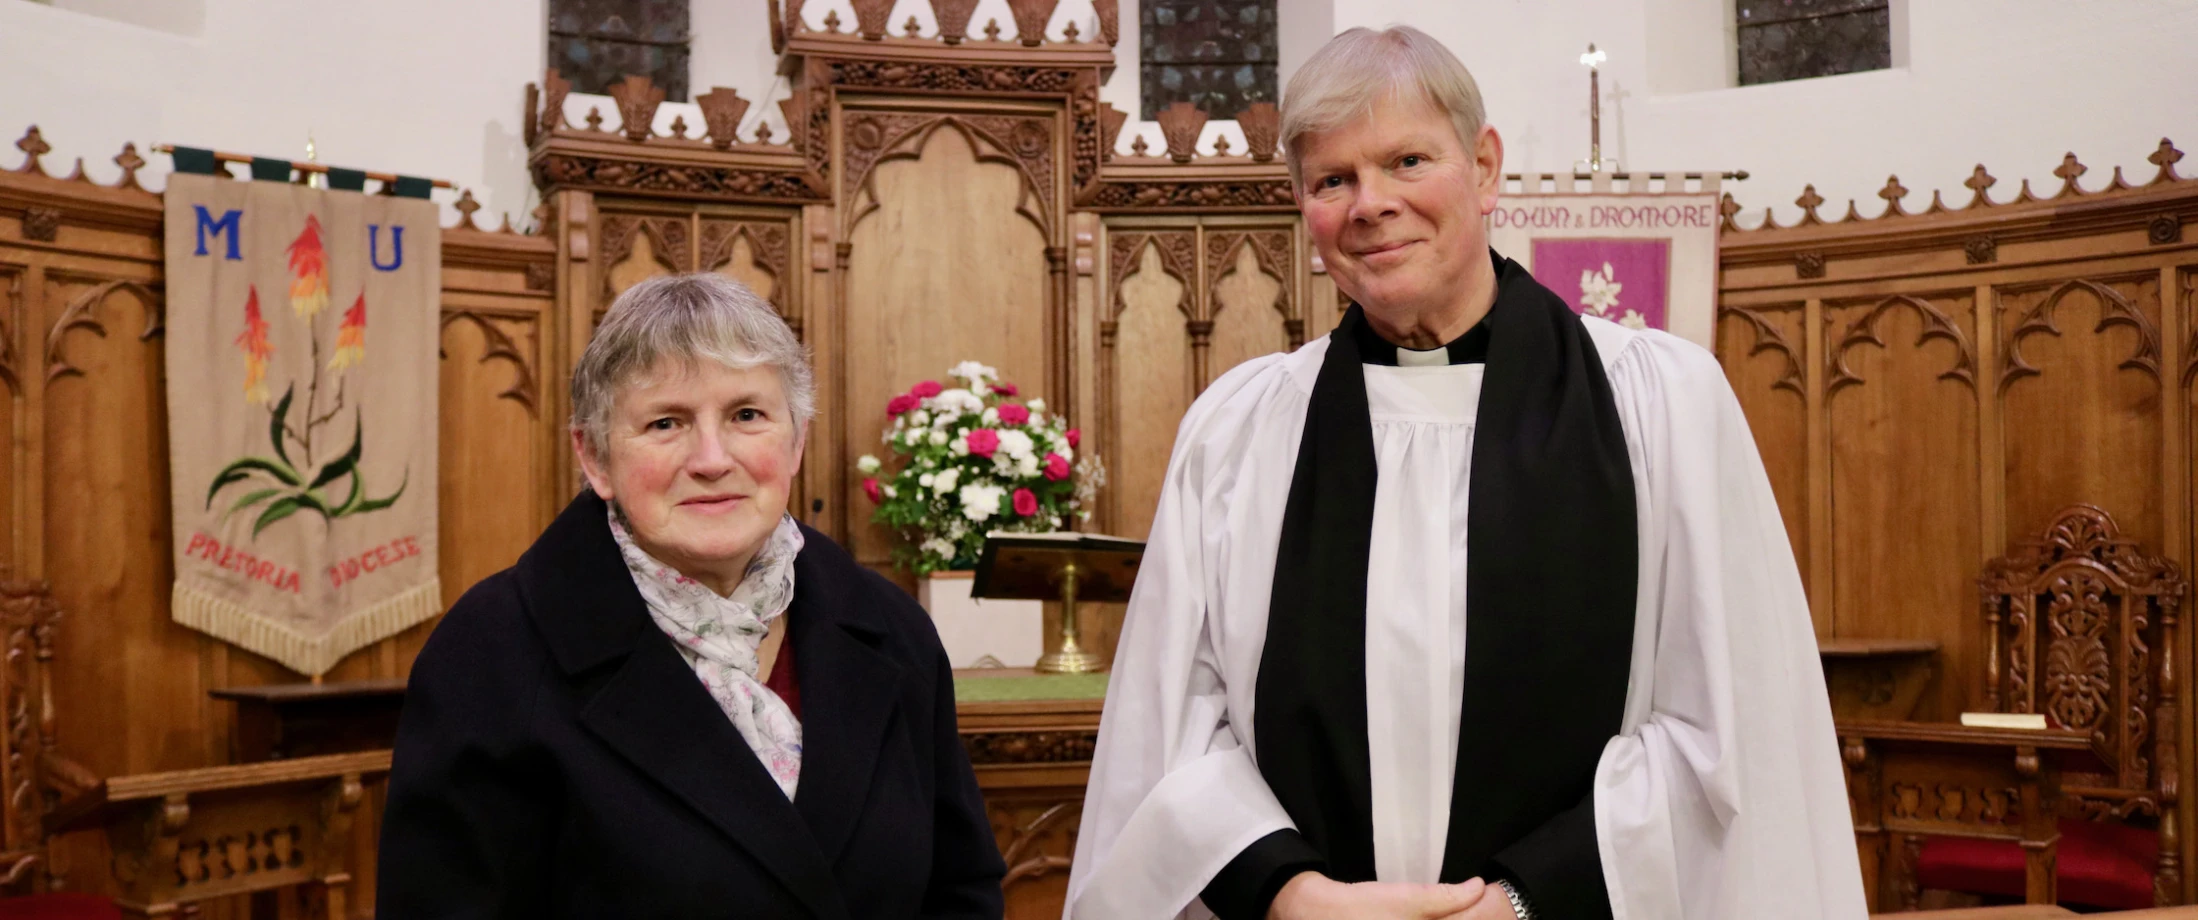 MU Diocesan President and Chaplain commissioned